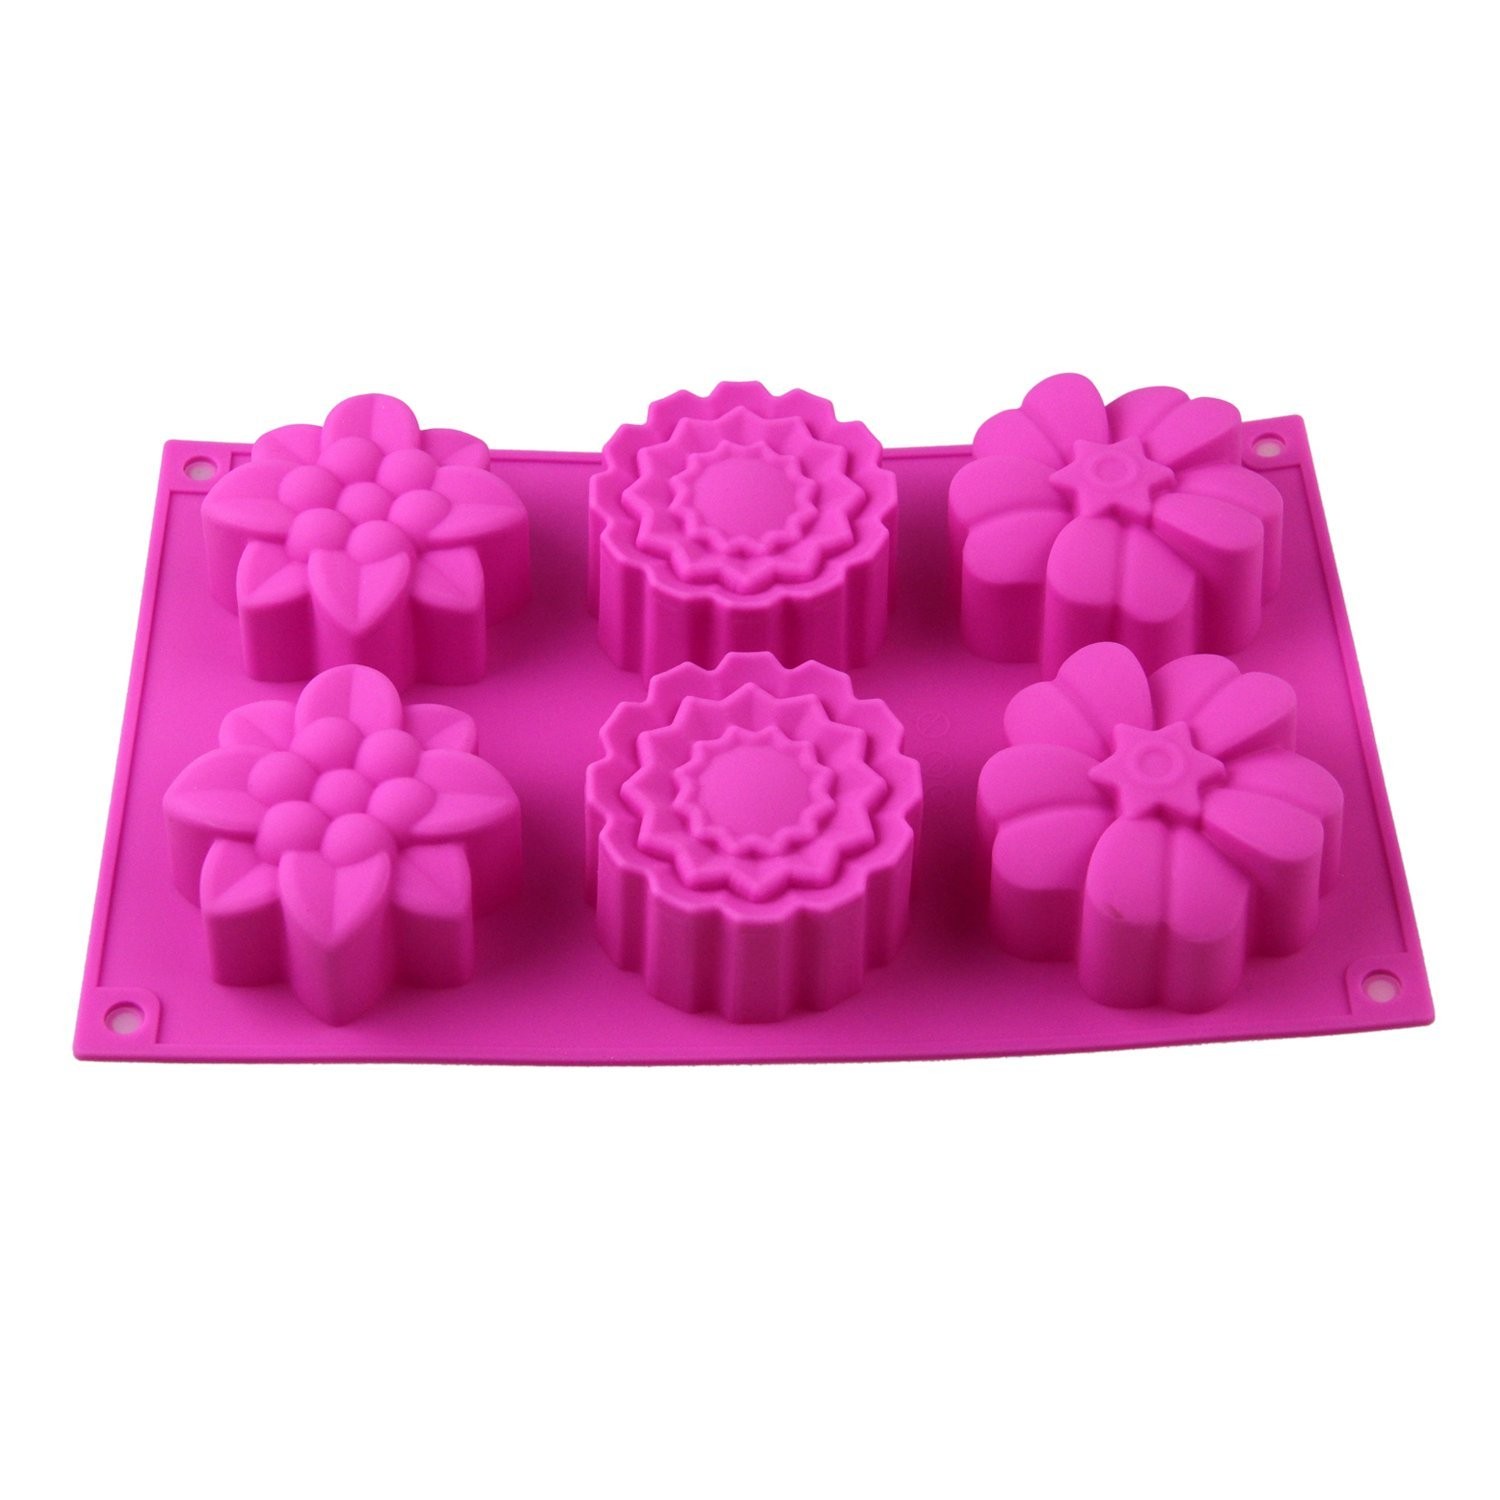 Buy cheap 6 Cavities Big Flower Silicone Cake Baking Mold Cake Pan Muffin Cups Handmade Soap Moulds from wholesalers